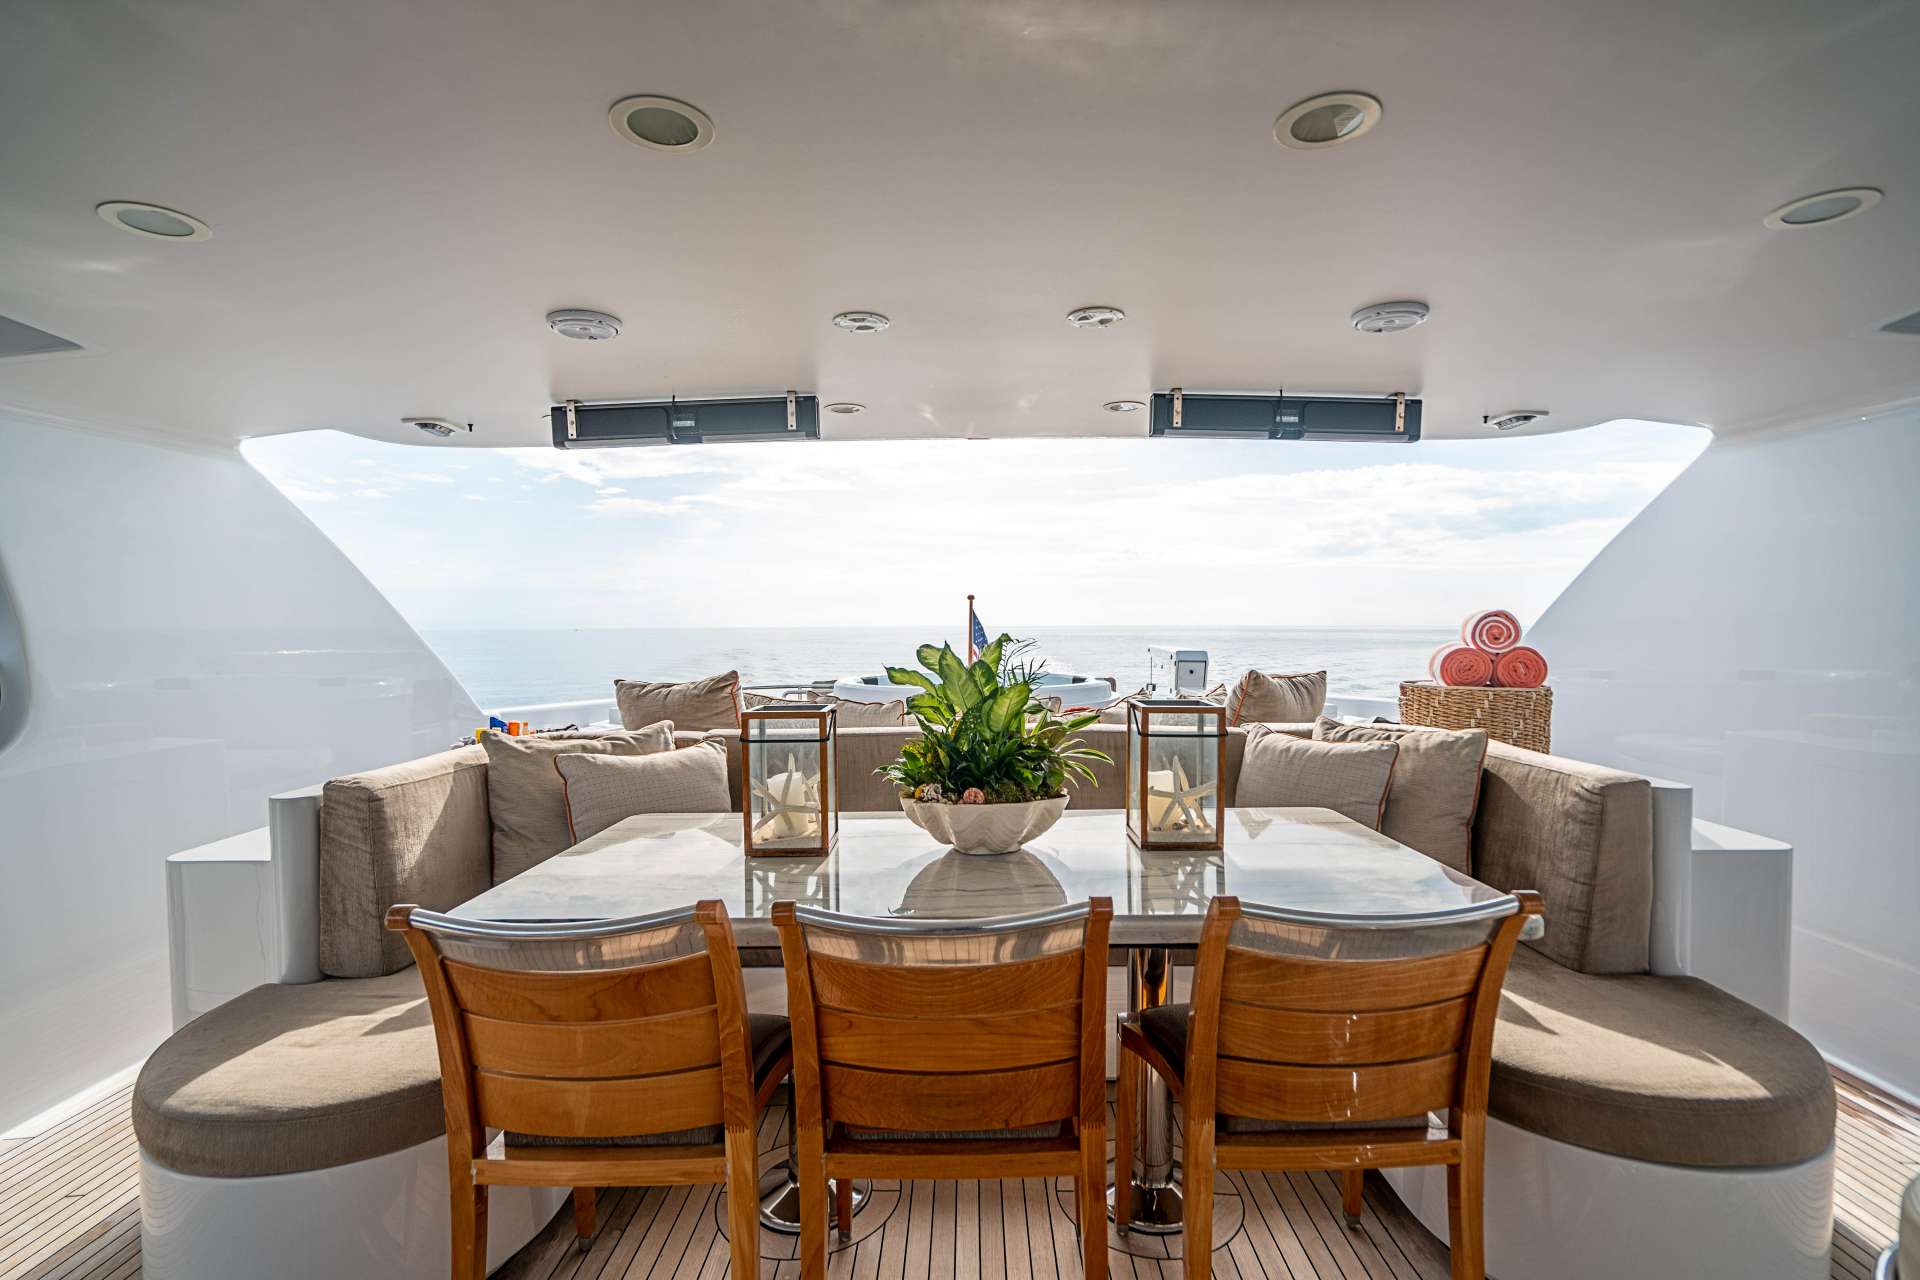 Flybridge dining and seating